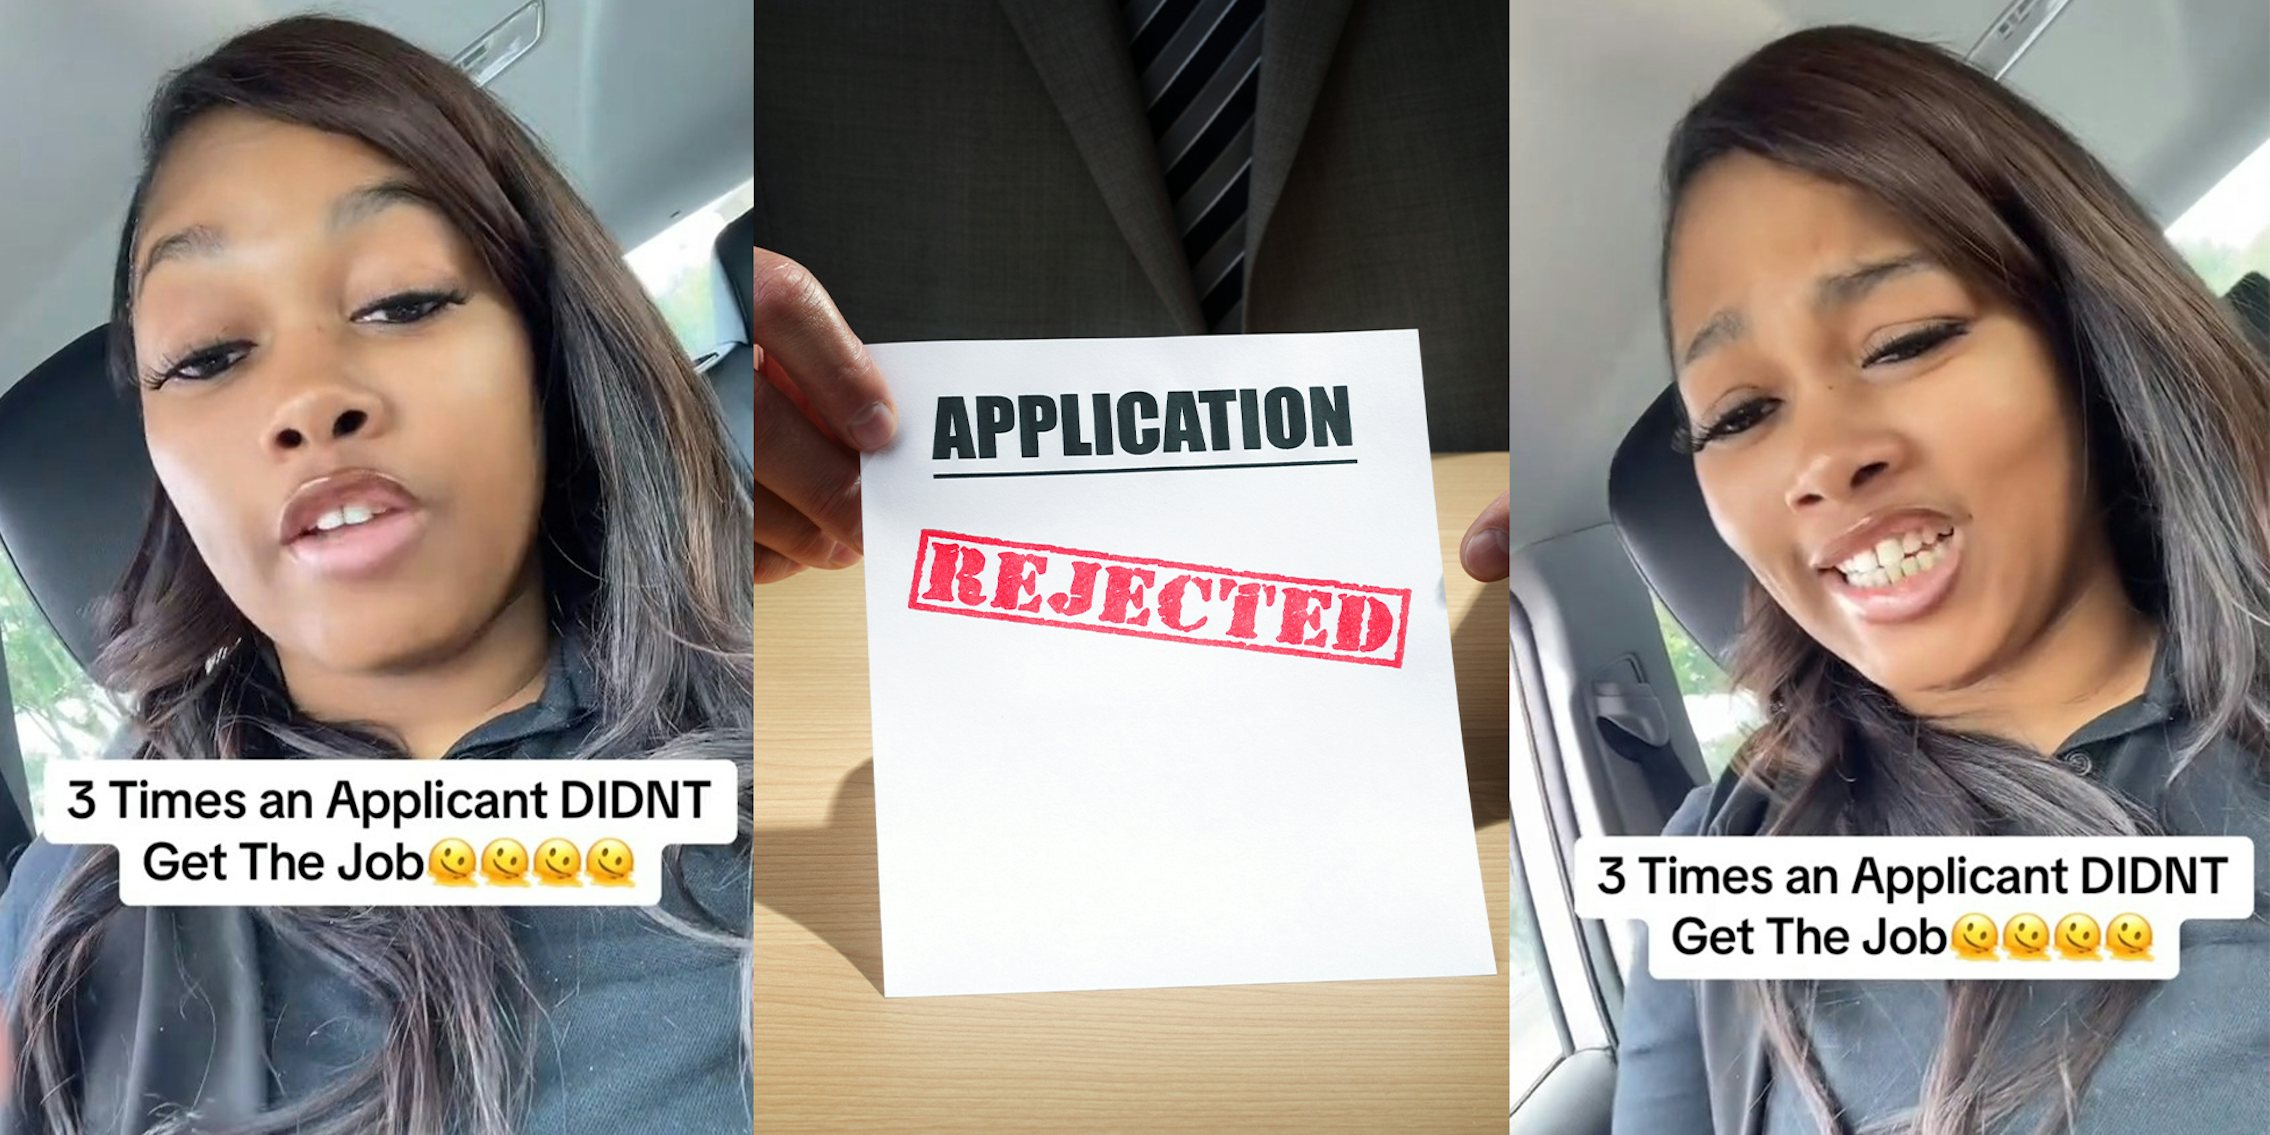 Restaurant manager explains the three times she has rejected applications